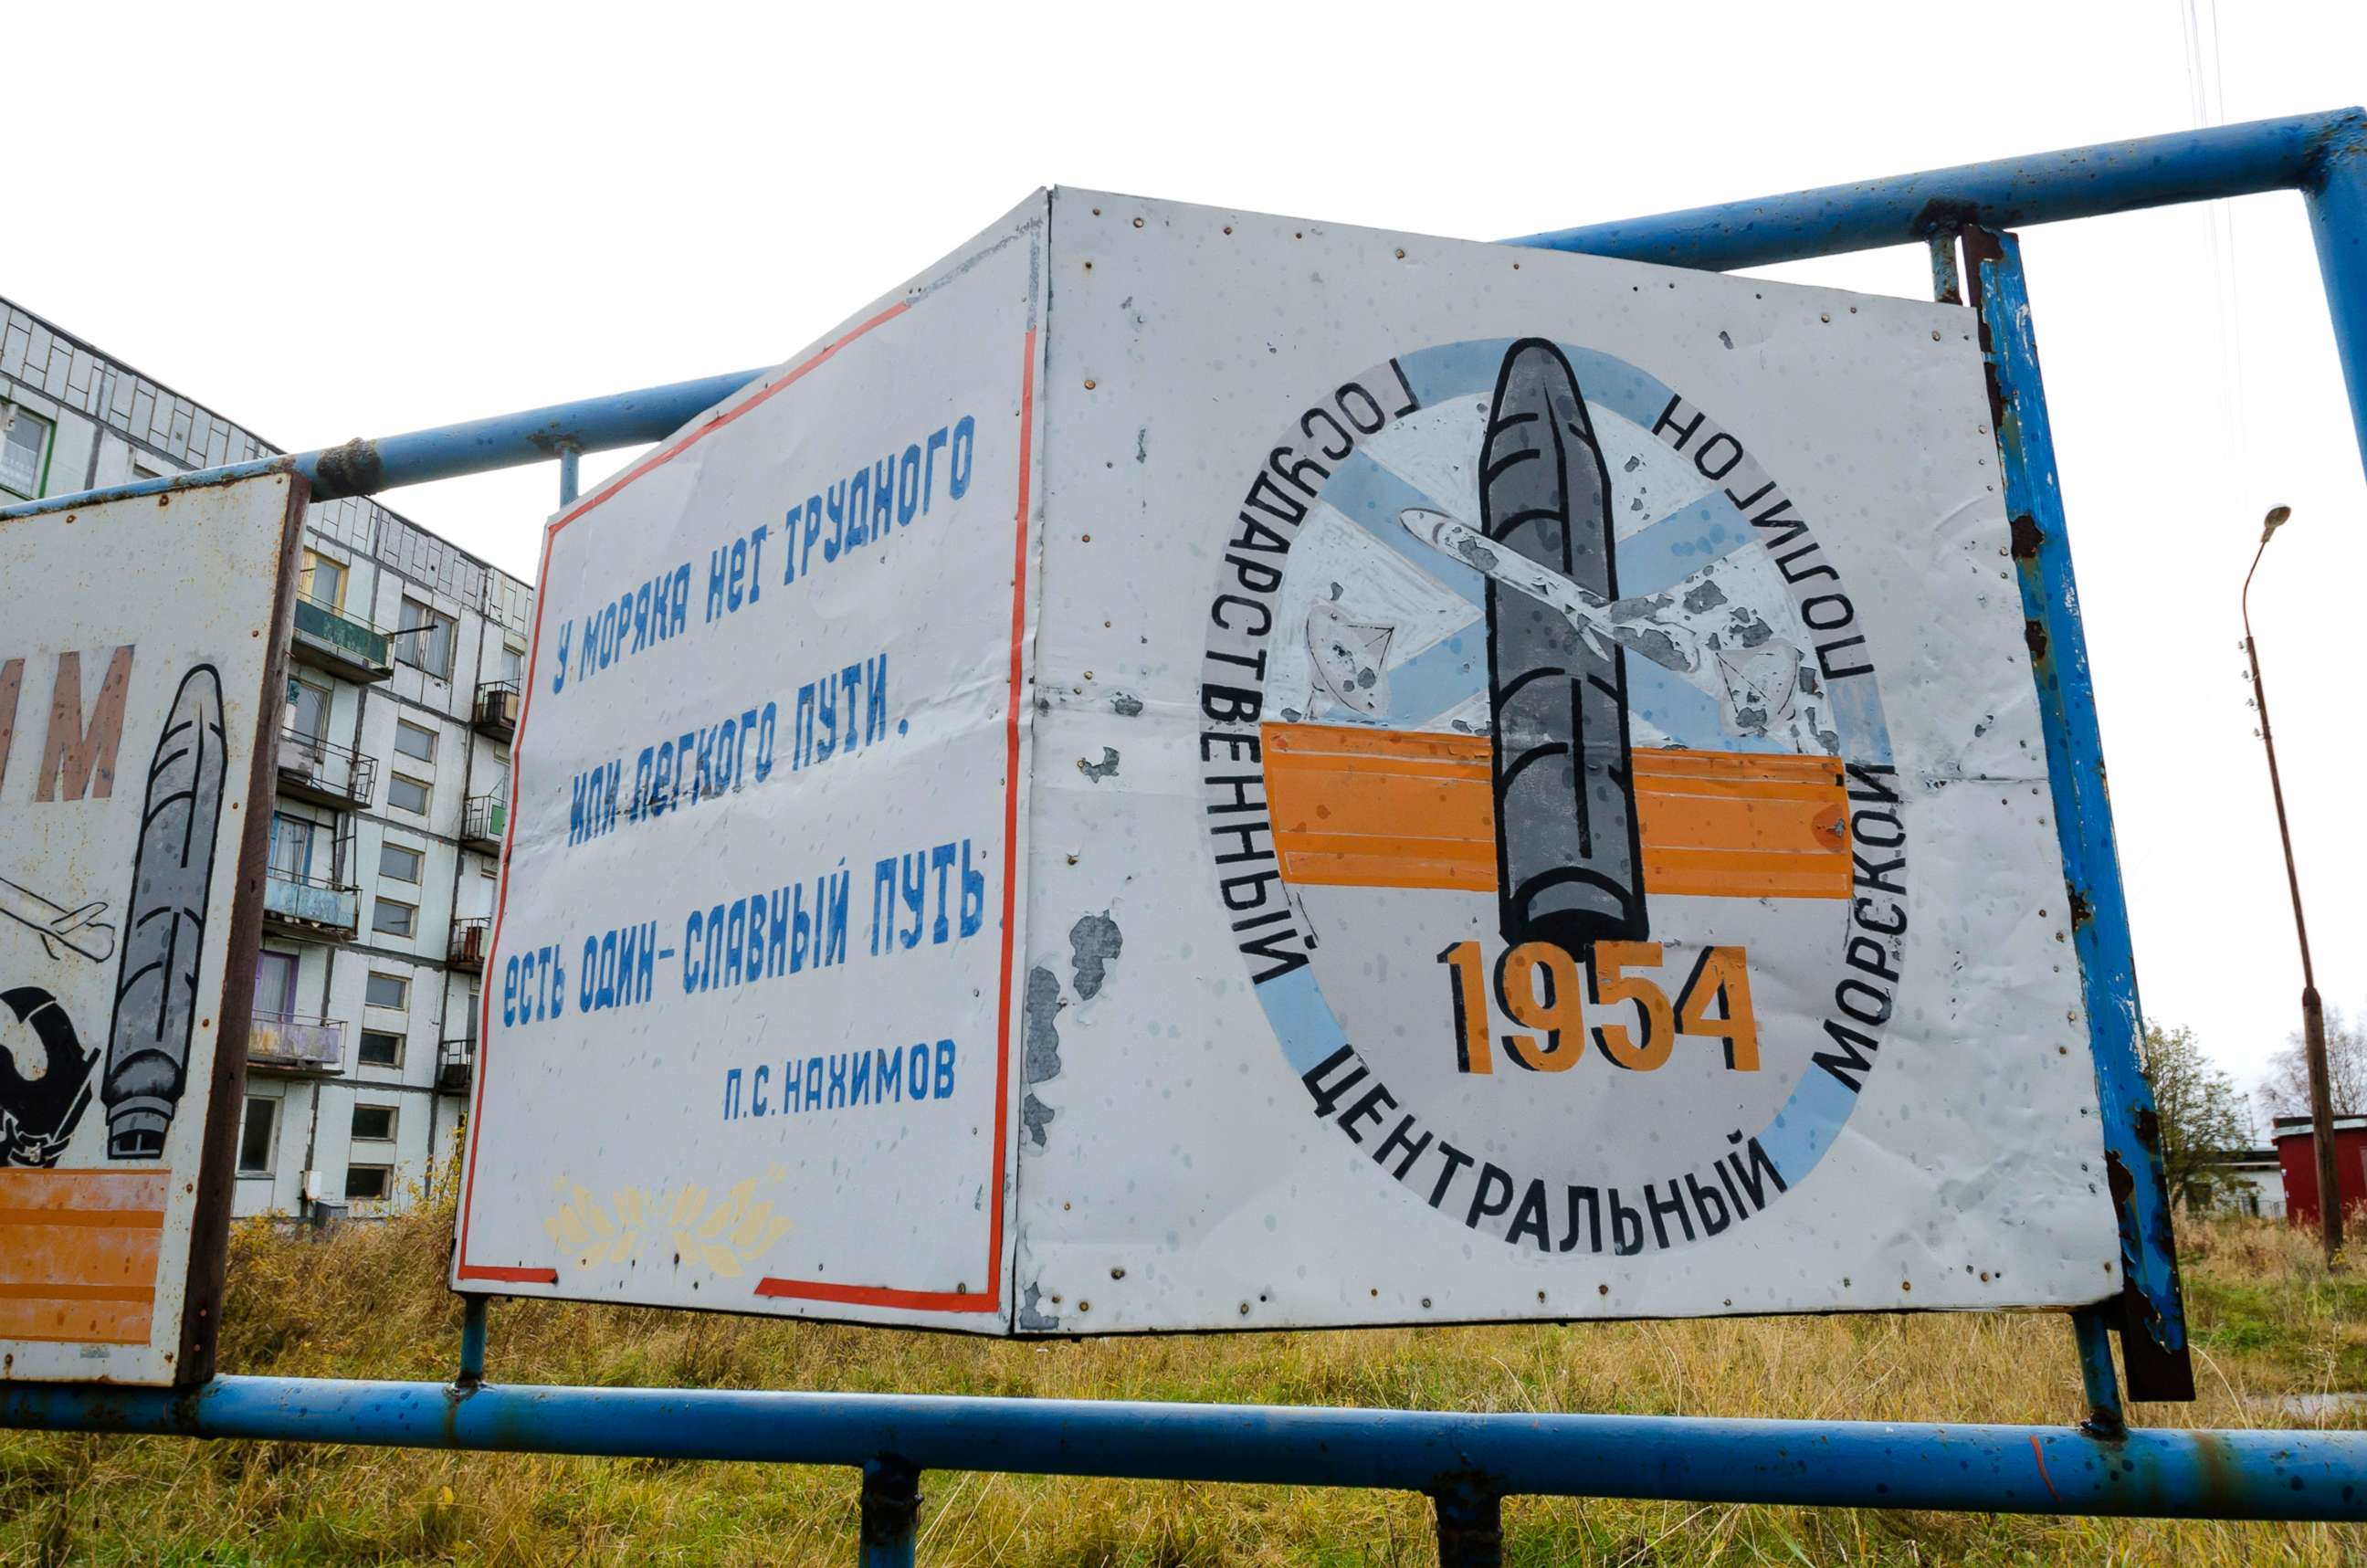 PHOTO: A billboard that reads "The State Central Navy Testing Range" near residential buildings in the village of Nyonoksa, northwestern Russia, Oct. 7, 2018.